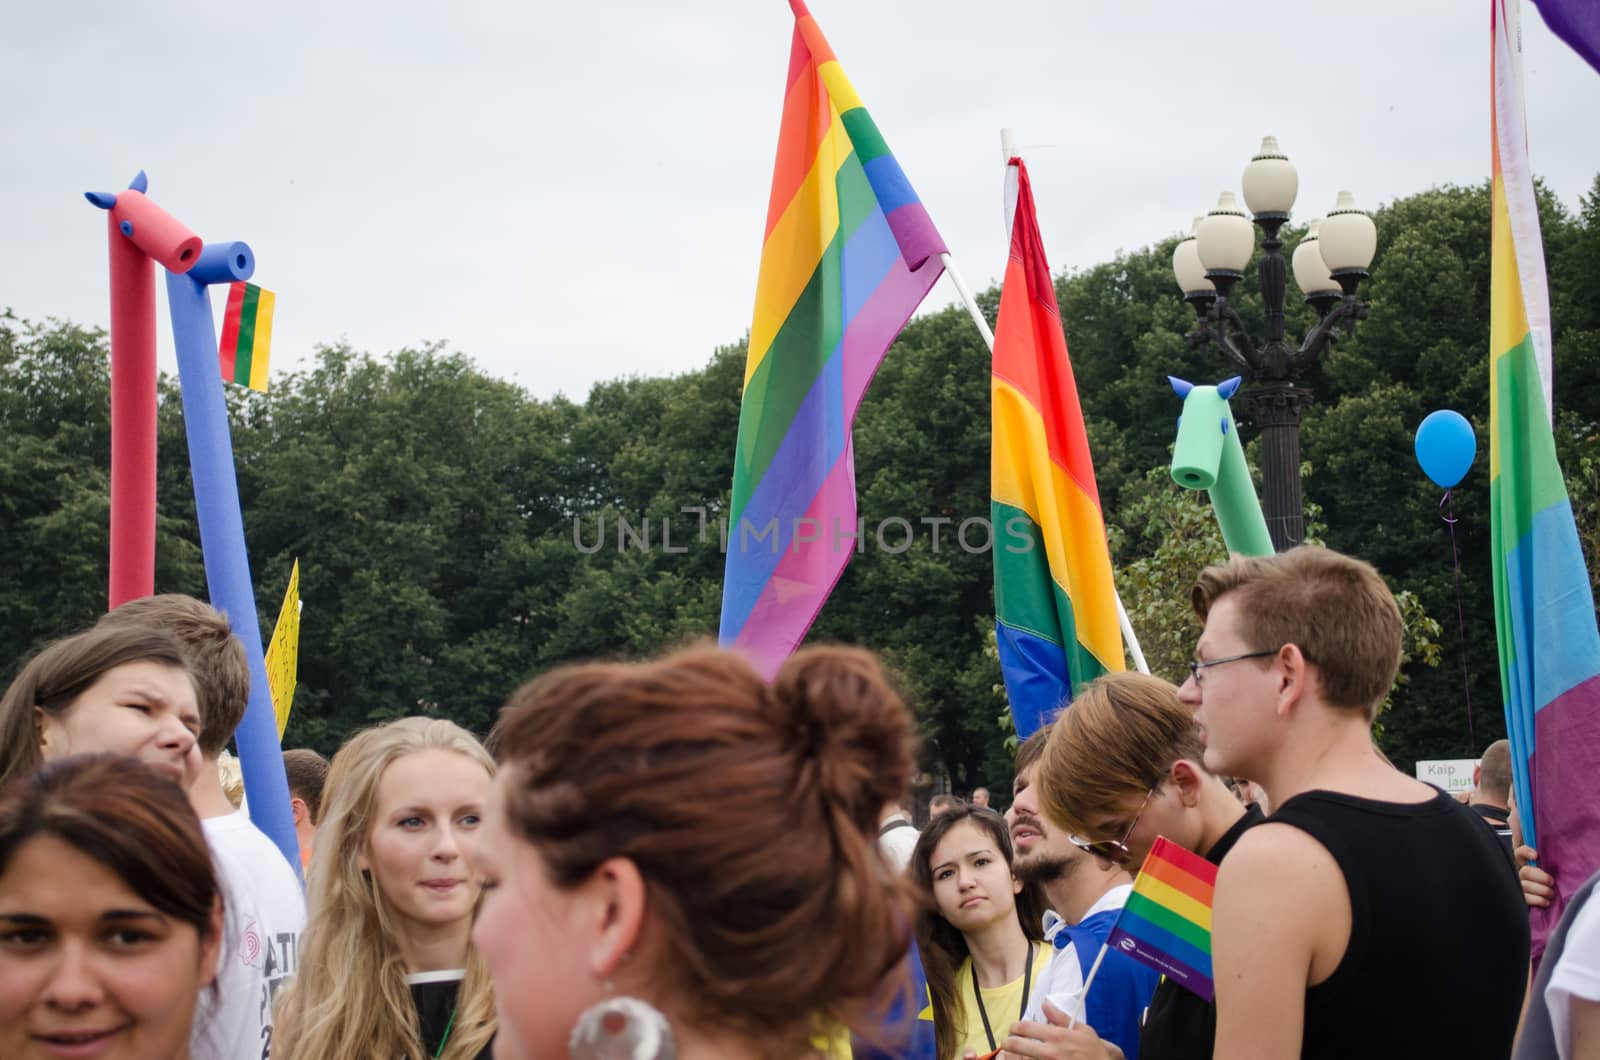 VILNIUS, LITHUANIA - JULY 27: unidentified people take part in the annual big baltic gay and lesbian parade on July 27, 2013 in VILNIUS, Lithuania.